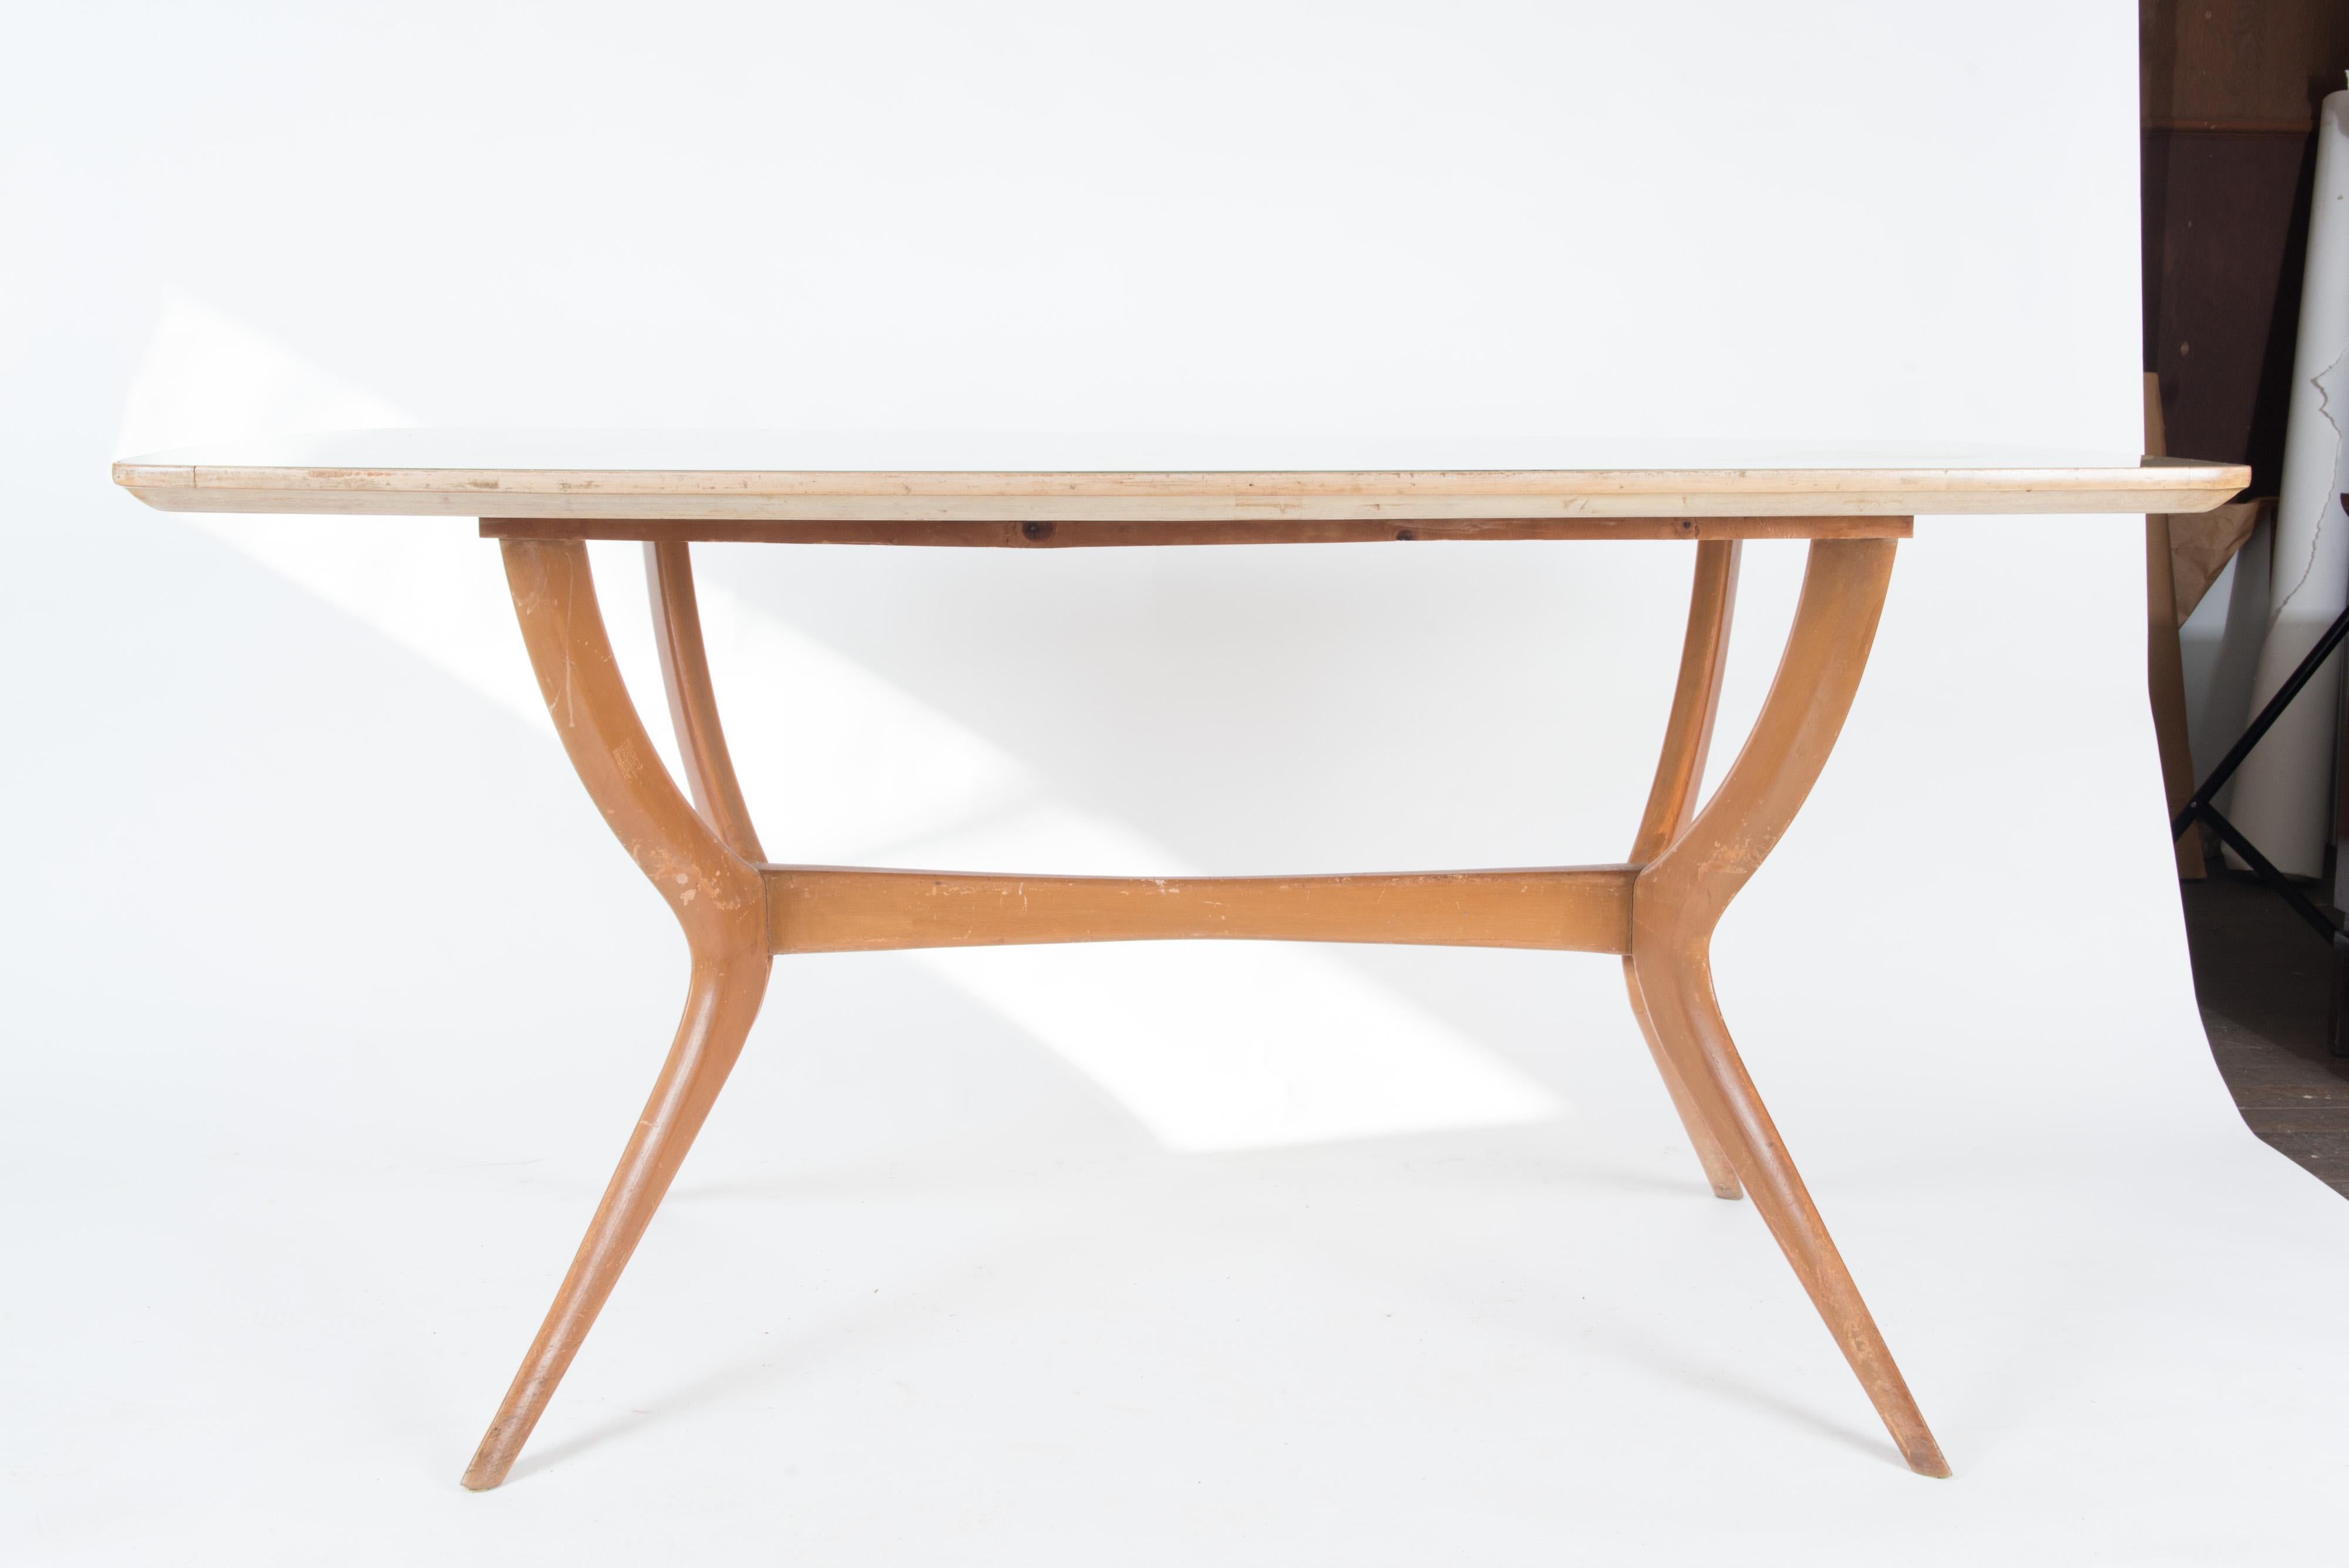 Sleek light wood 1950s dining table or desk. The wood top is hand painted under glass.